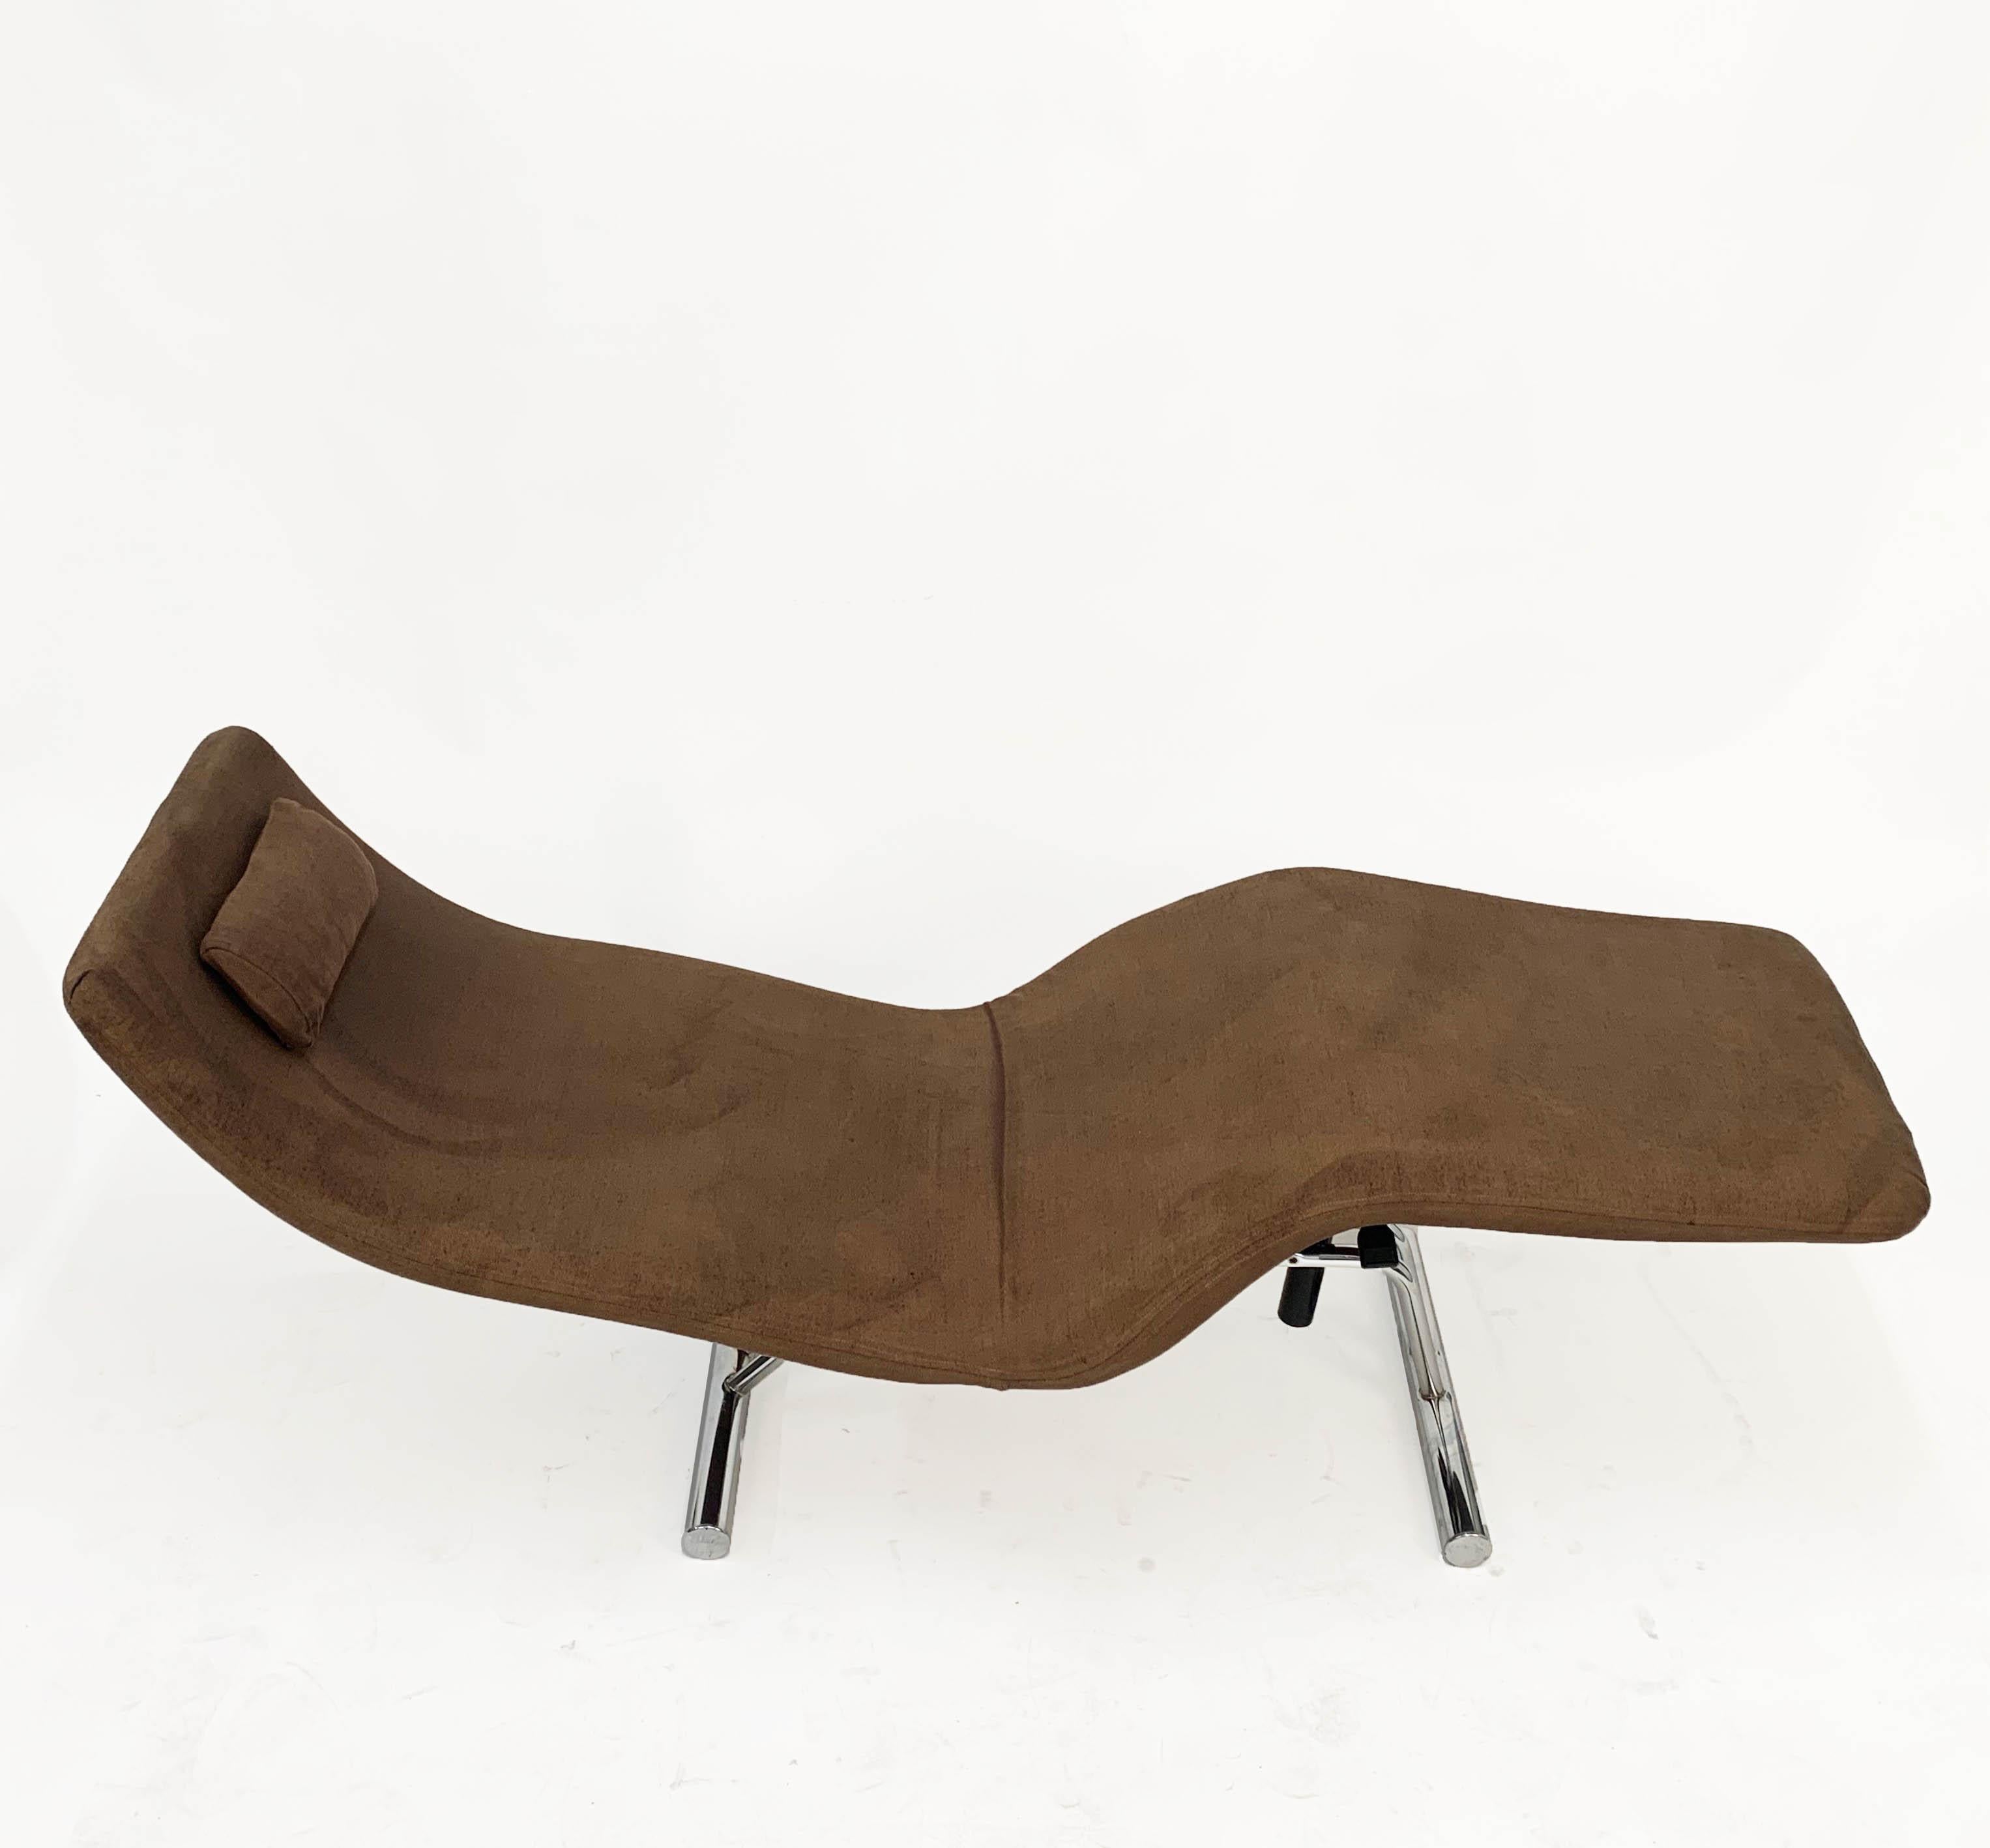 Midcentury Brown Fabric and Chrome Steel Chaise Longue, Paul Tuttle Style, 1980s For Sale 5